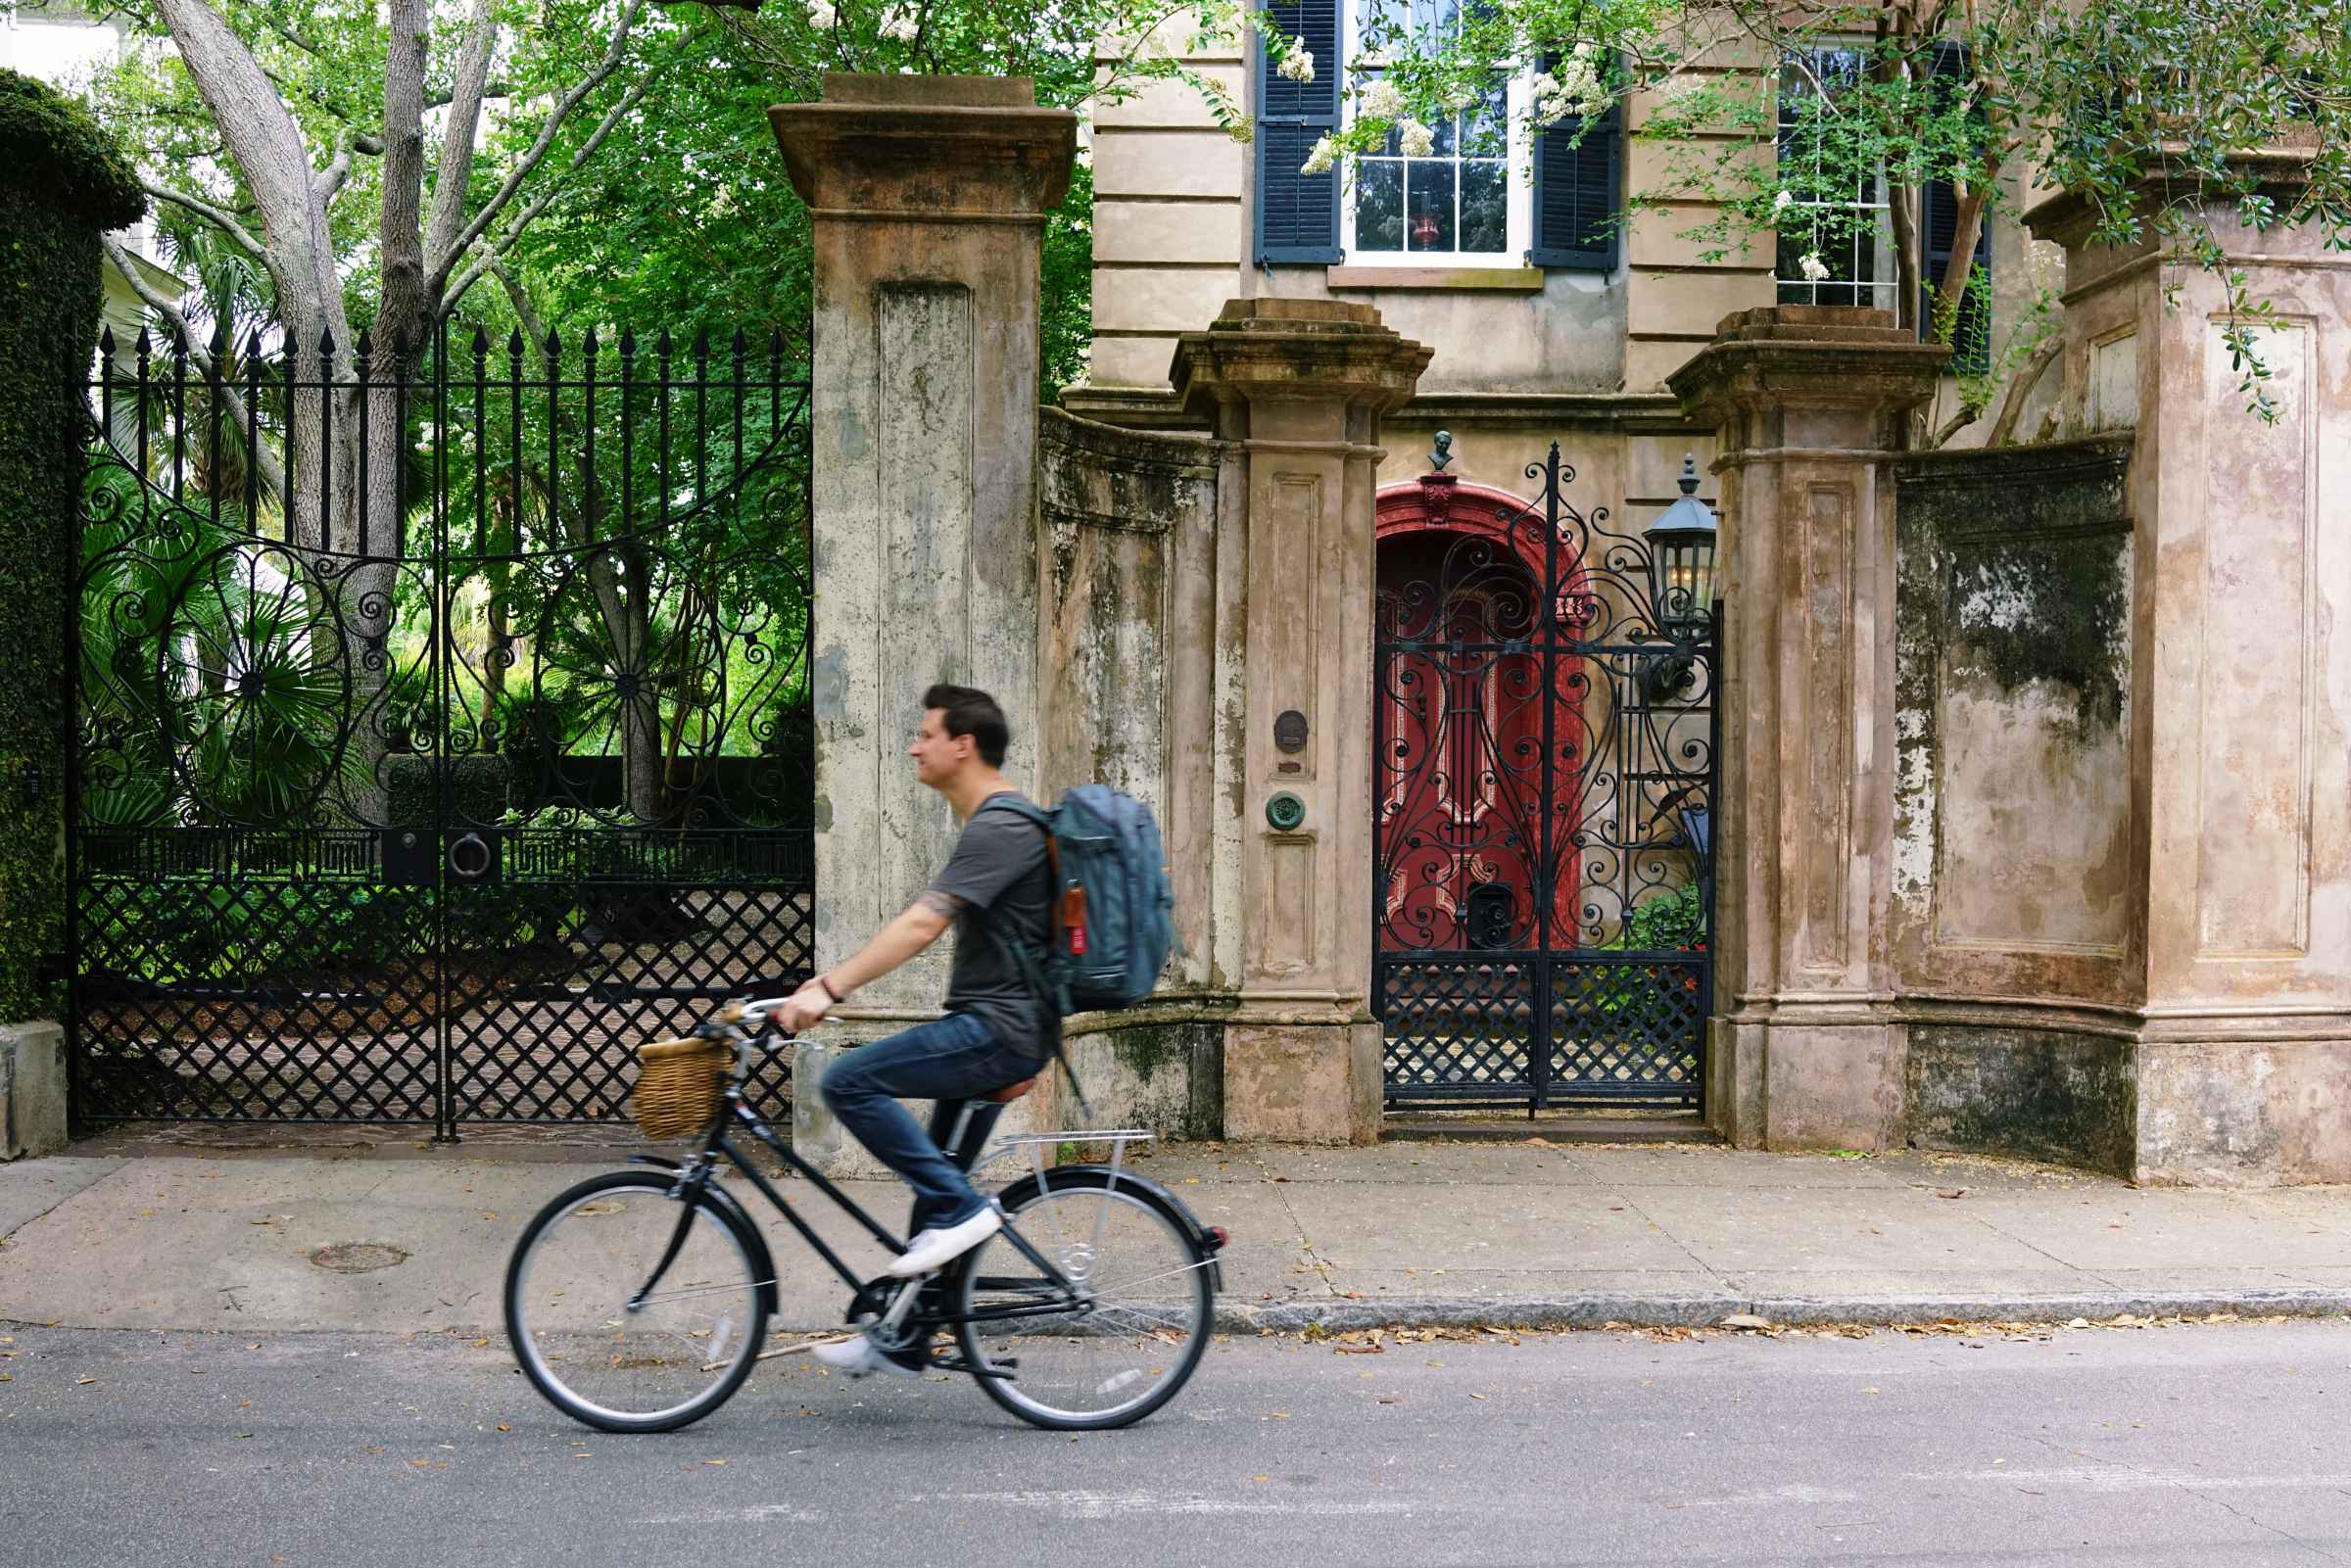 A man wearing a backpack riding on a bike in front of an old building with a gate.